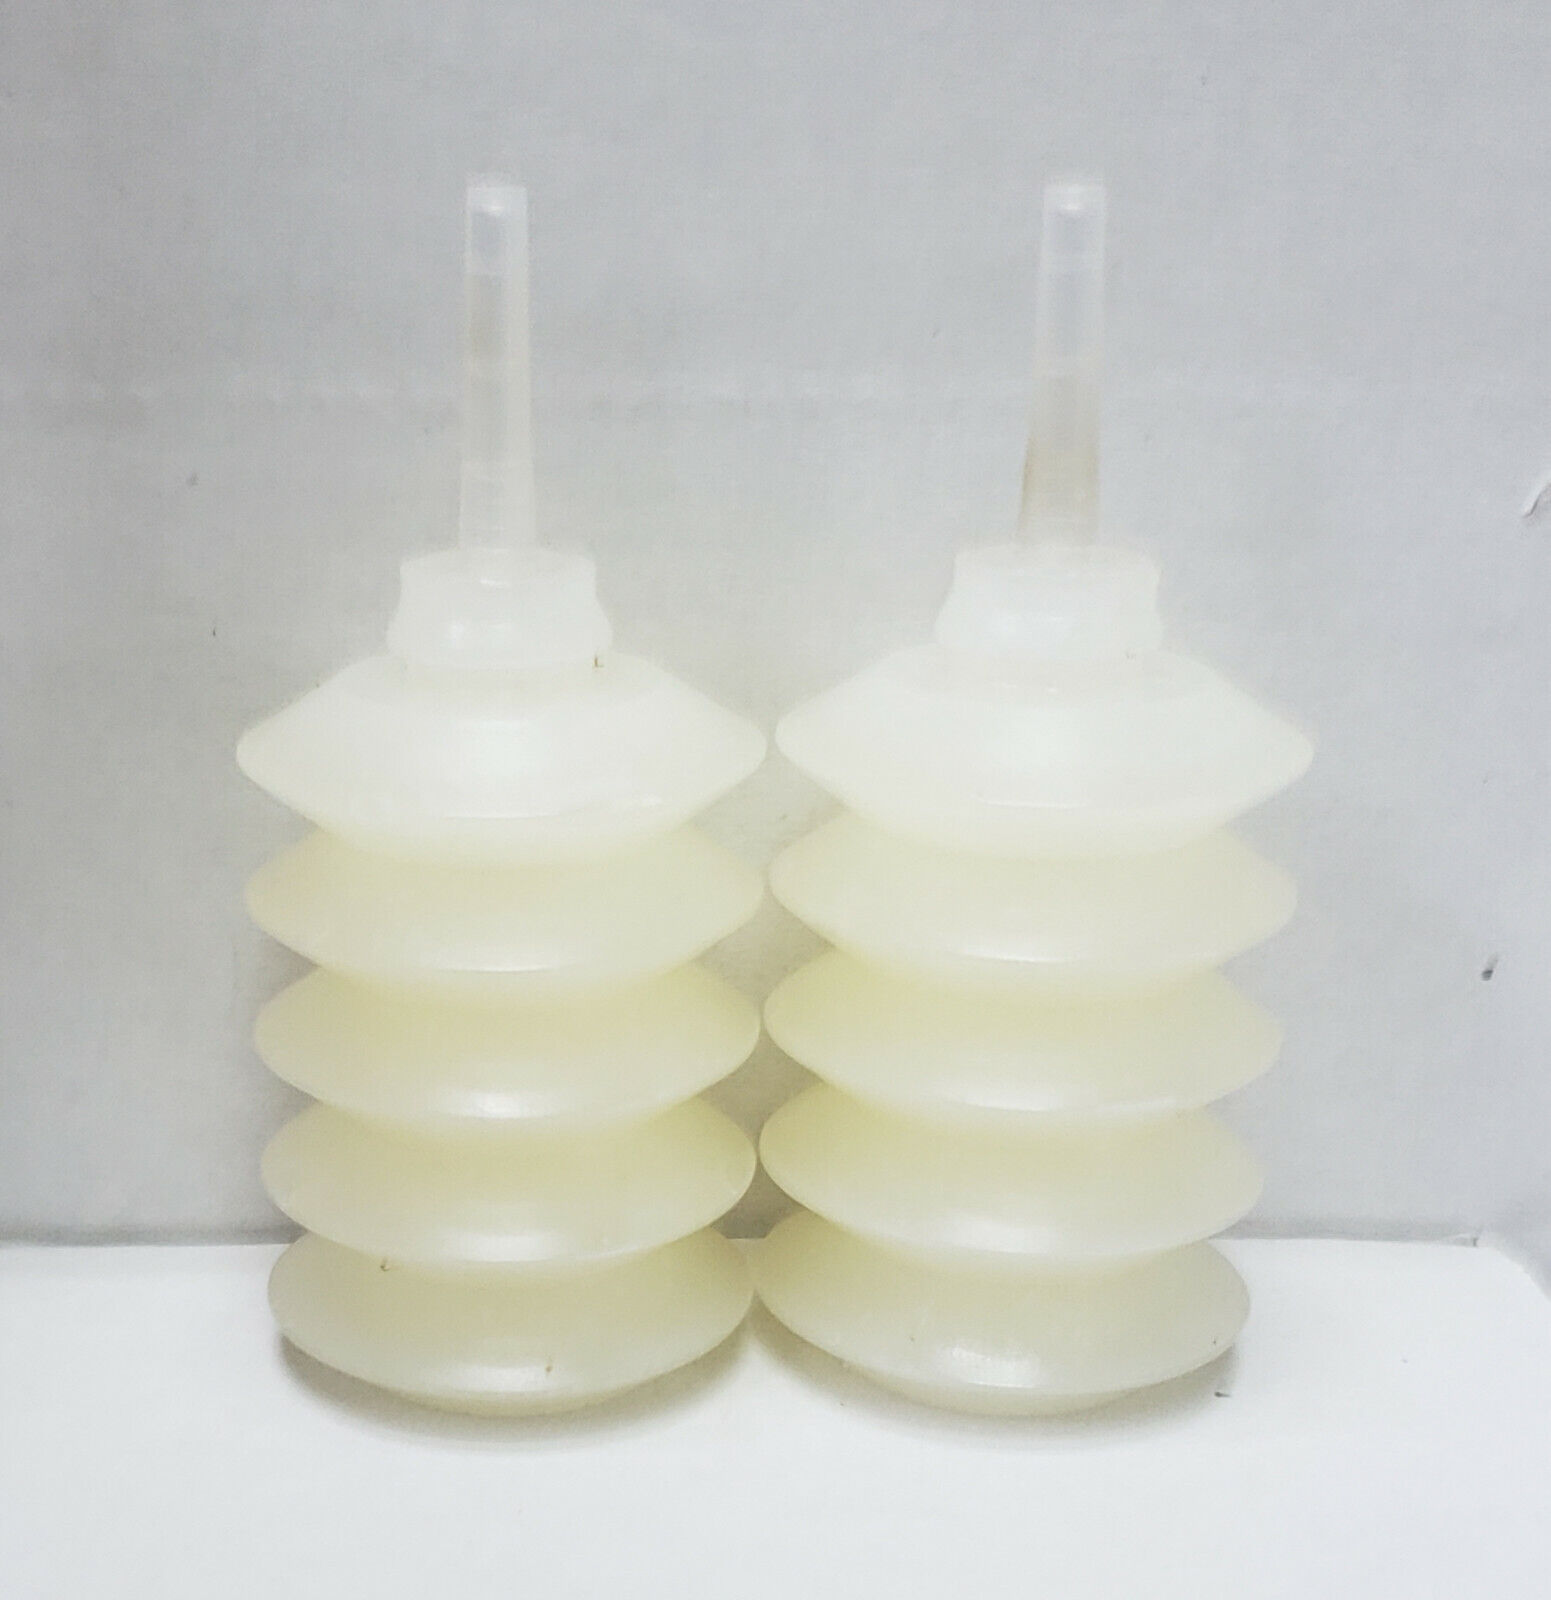 New 2pc. Clock Mainspring Grease in Accordian Bottle   (OL-62)